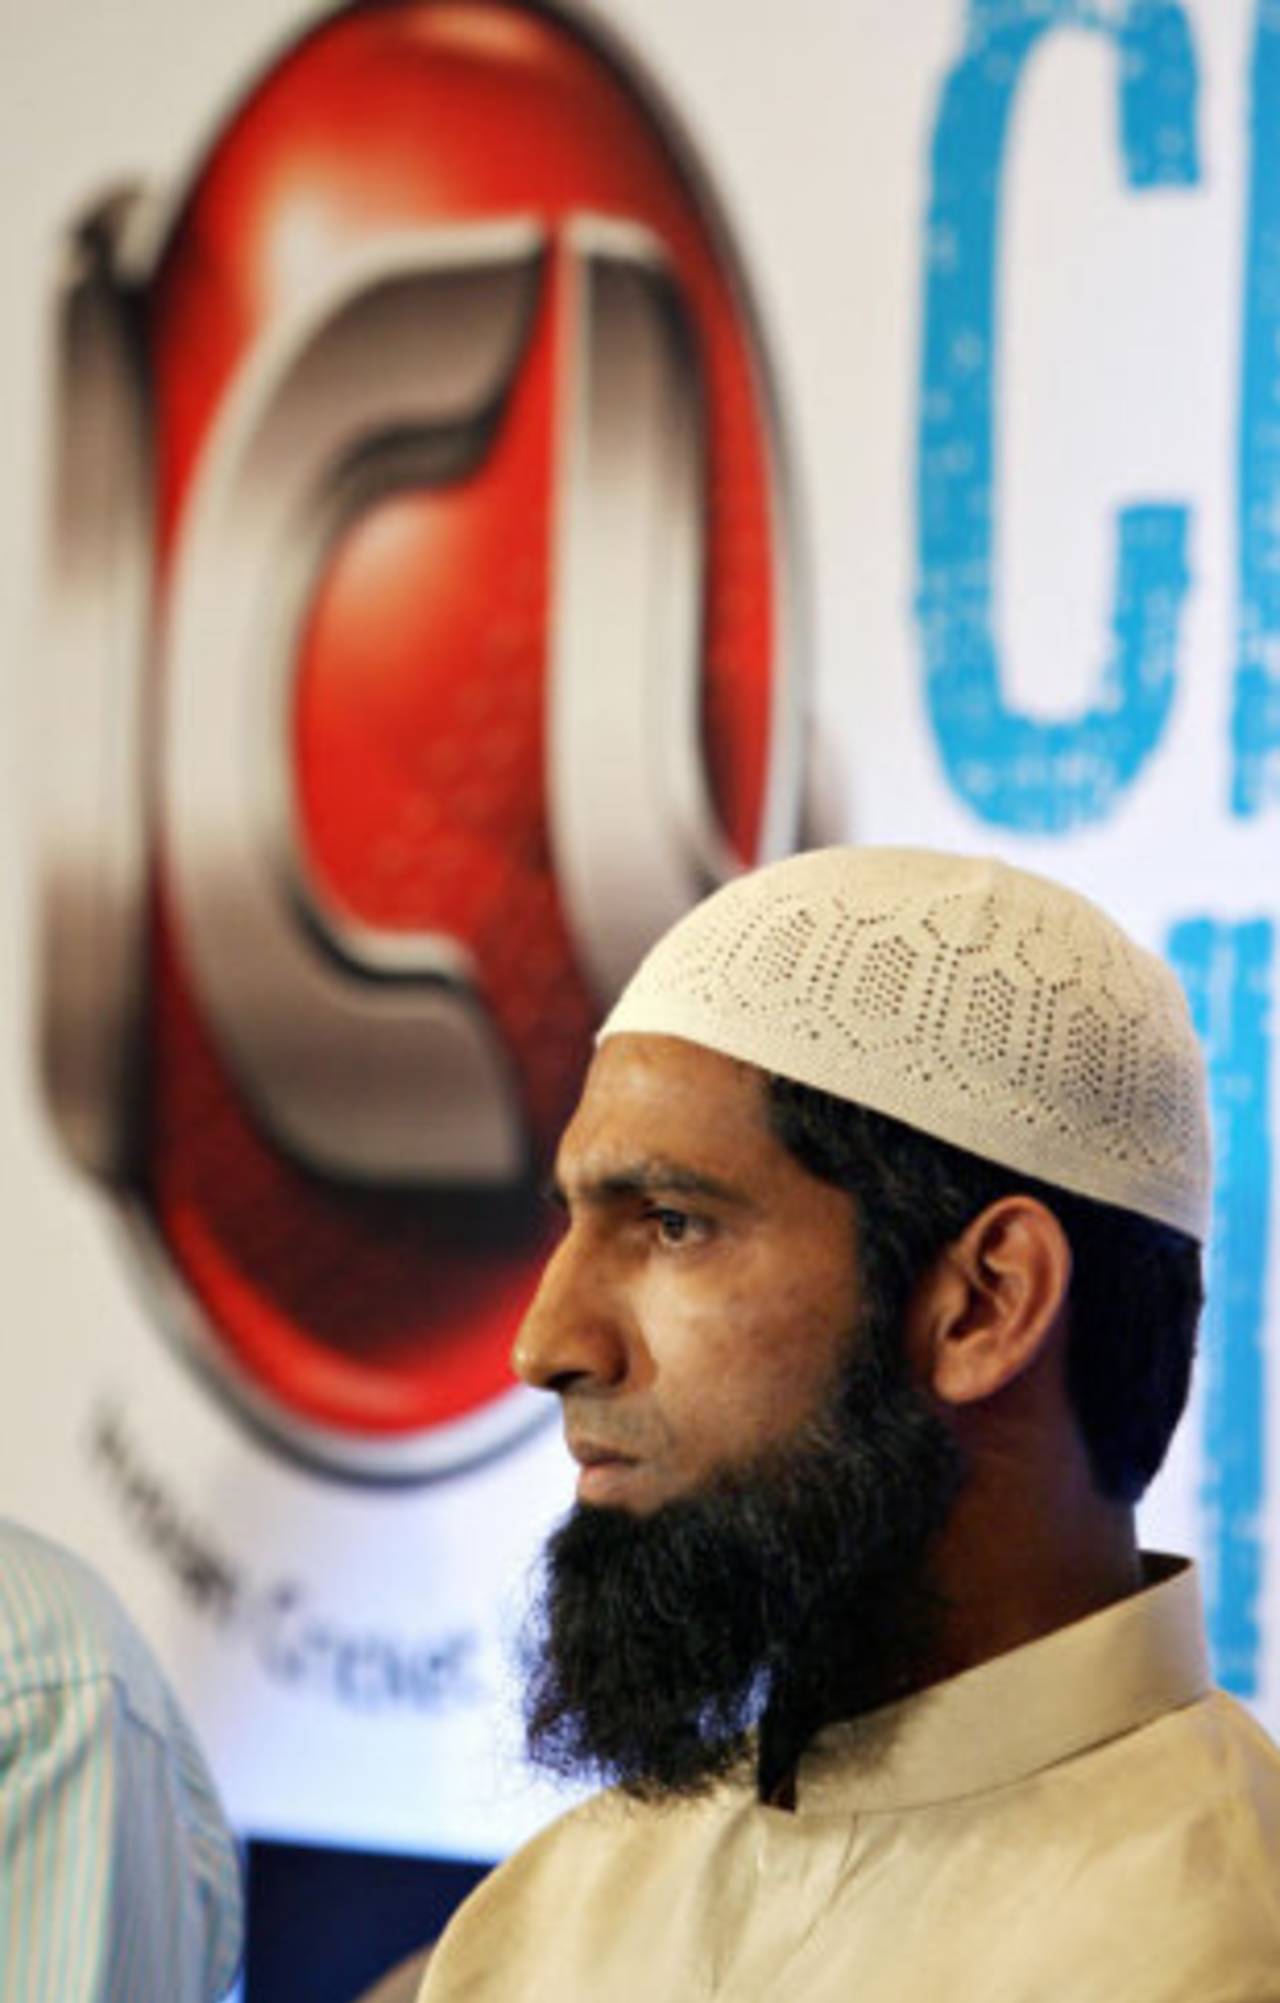 Mohammad Yousuf at a press conference after rejoining the ICL, Delhi, November 5, 2008